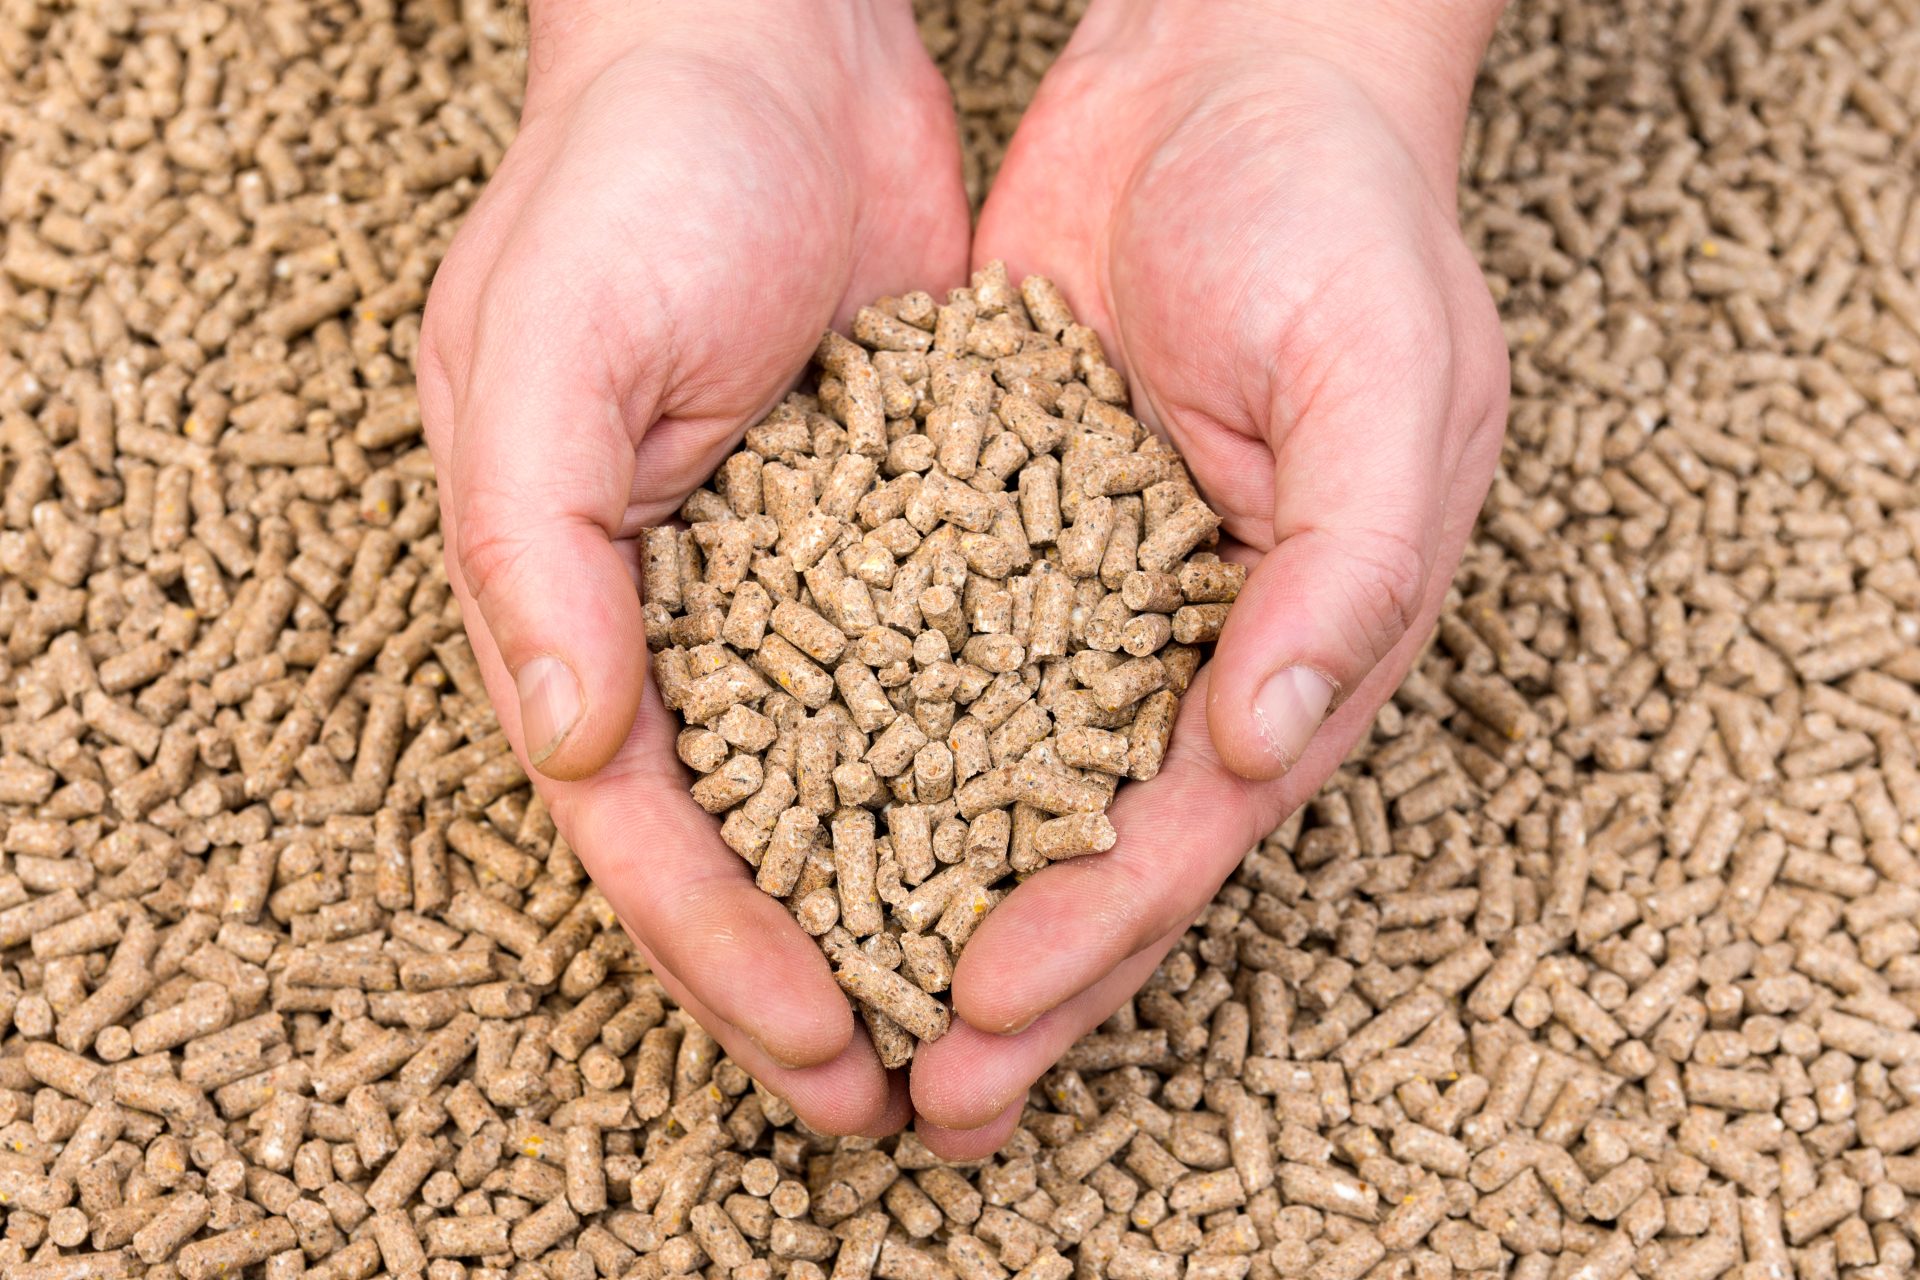 Animal feed pellets made with the animal feed industry equipment from Colorado Mill Equipment.